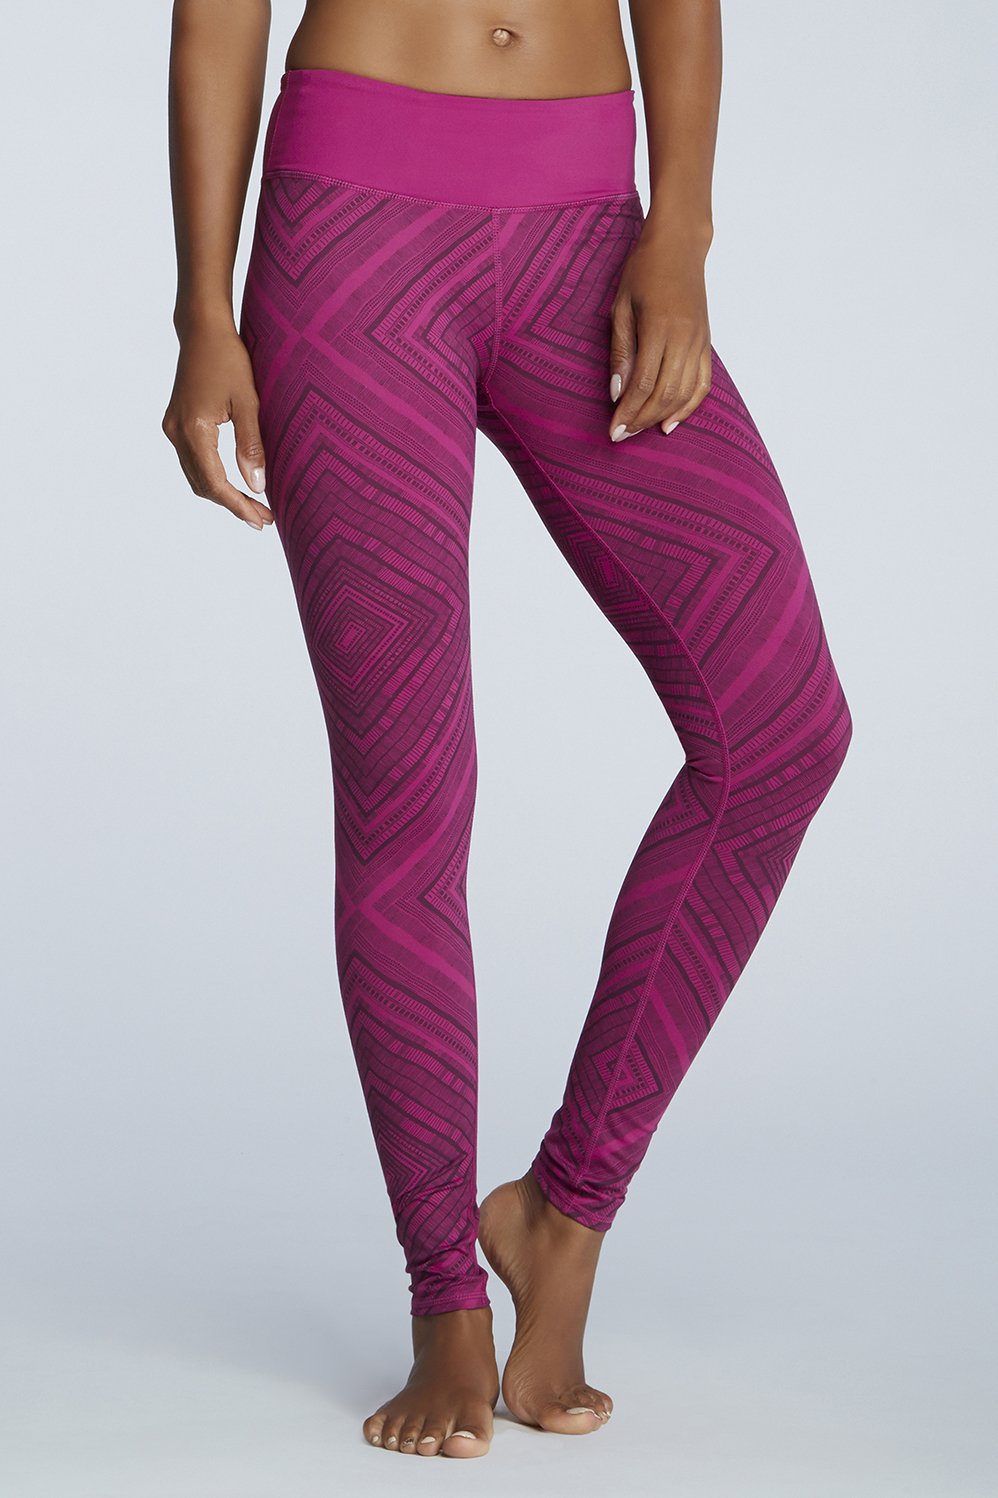 See Through Leggings Fabletics Complaints  International Society of  Precision Agriculture